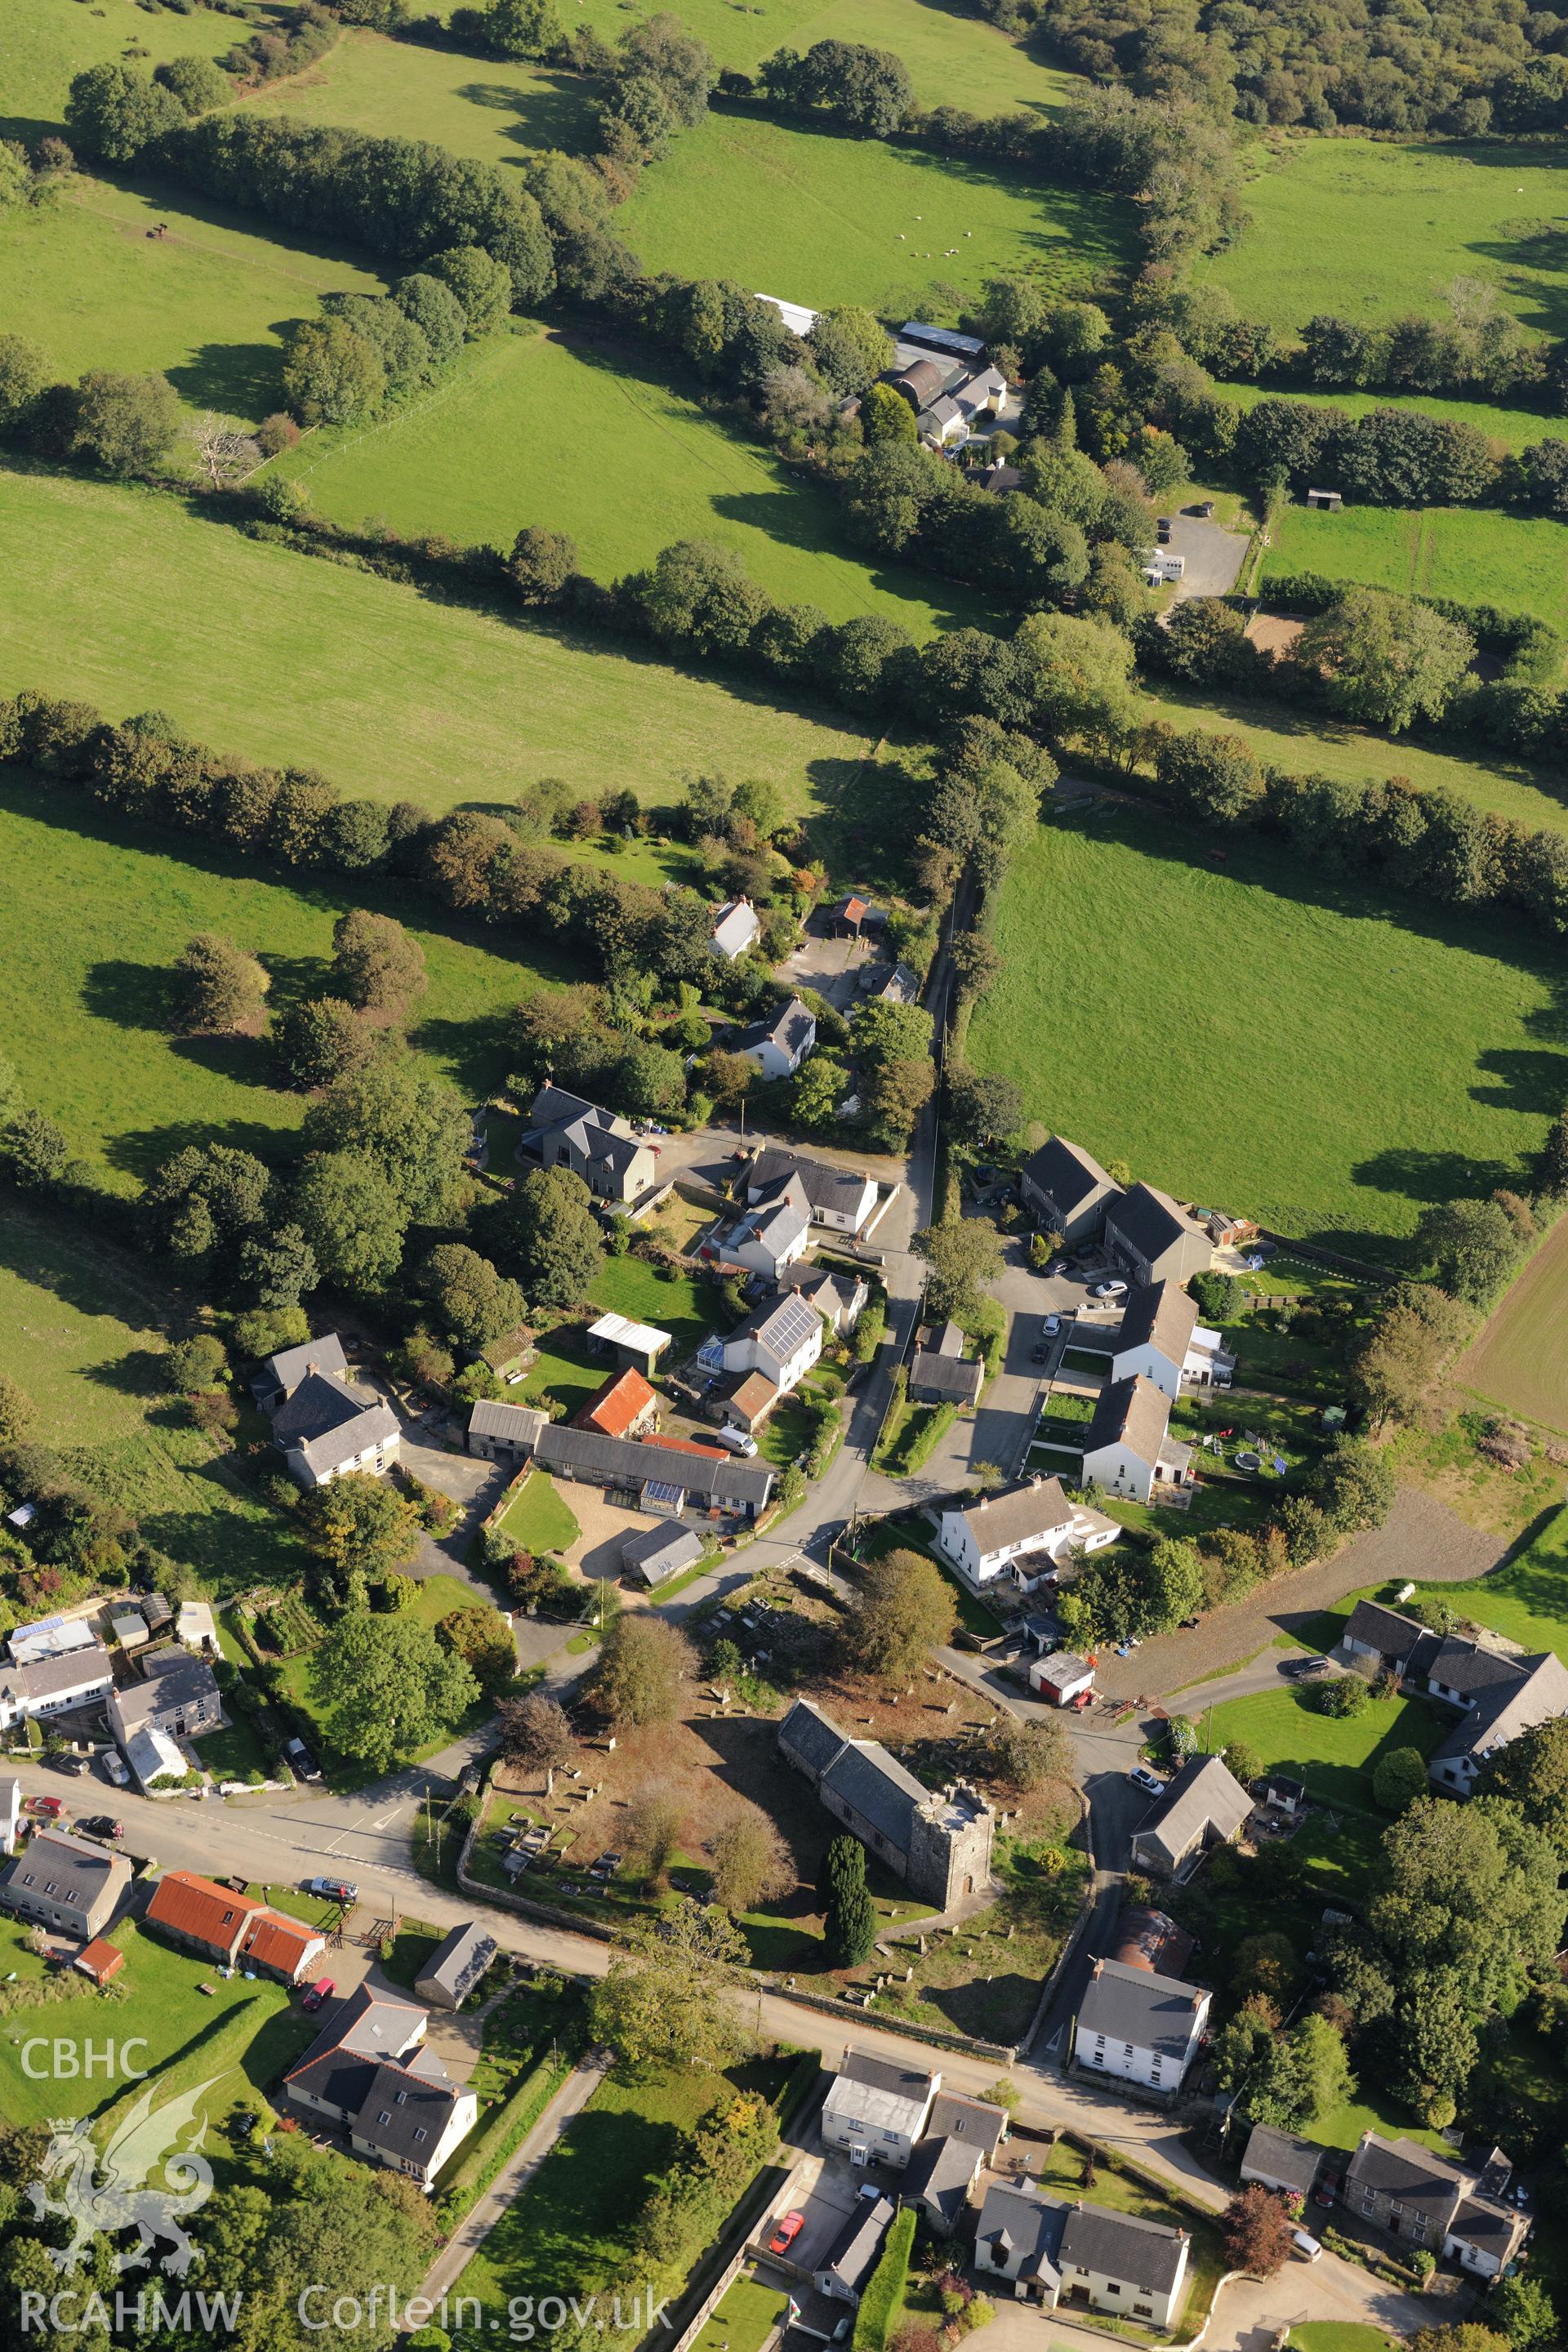 St. Mary's church in the village of Ambleston, Pembrokeshire. Oblique aerial photograph taken during the Royal Commission's programme of archaeological aerial reconnaissance by Toby Driver on 30th September 2015.